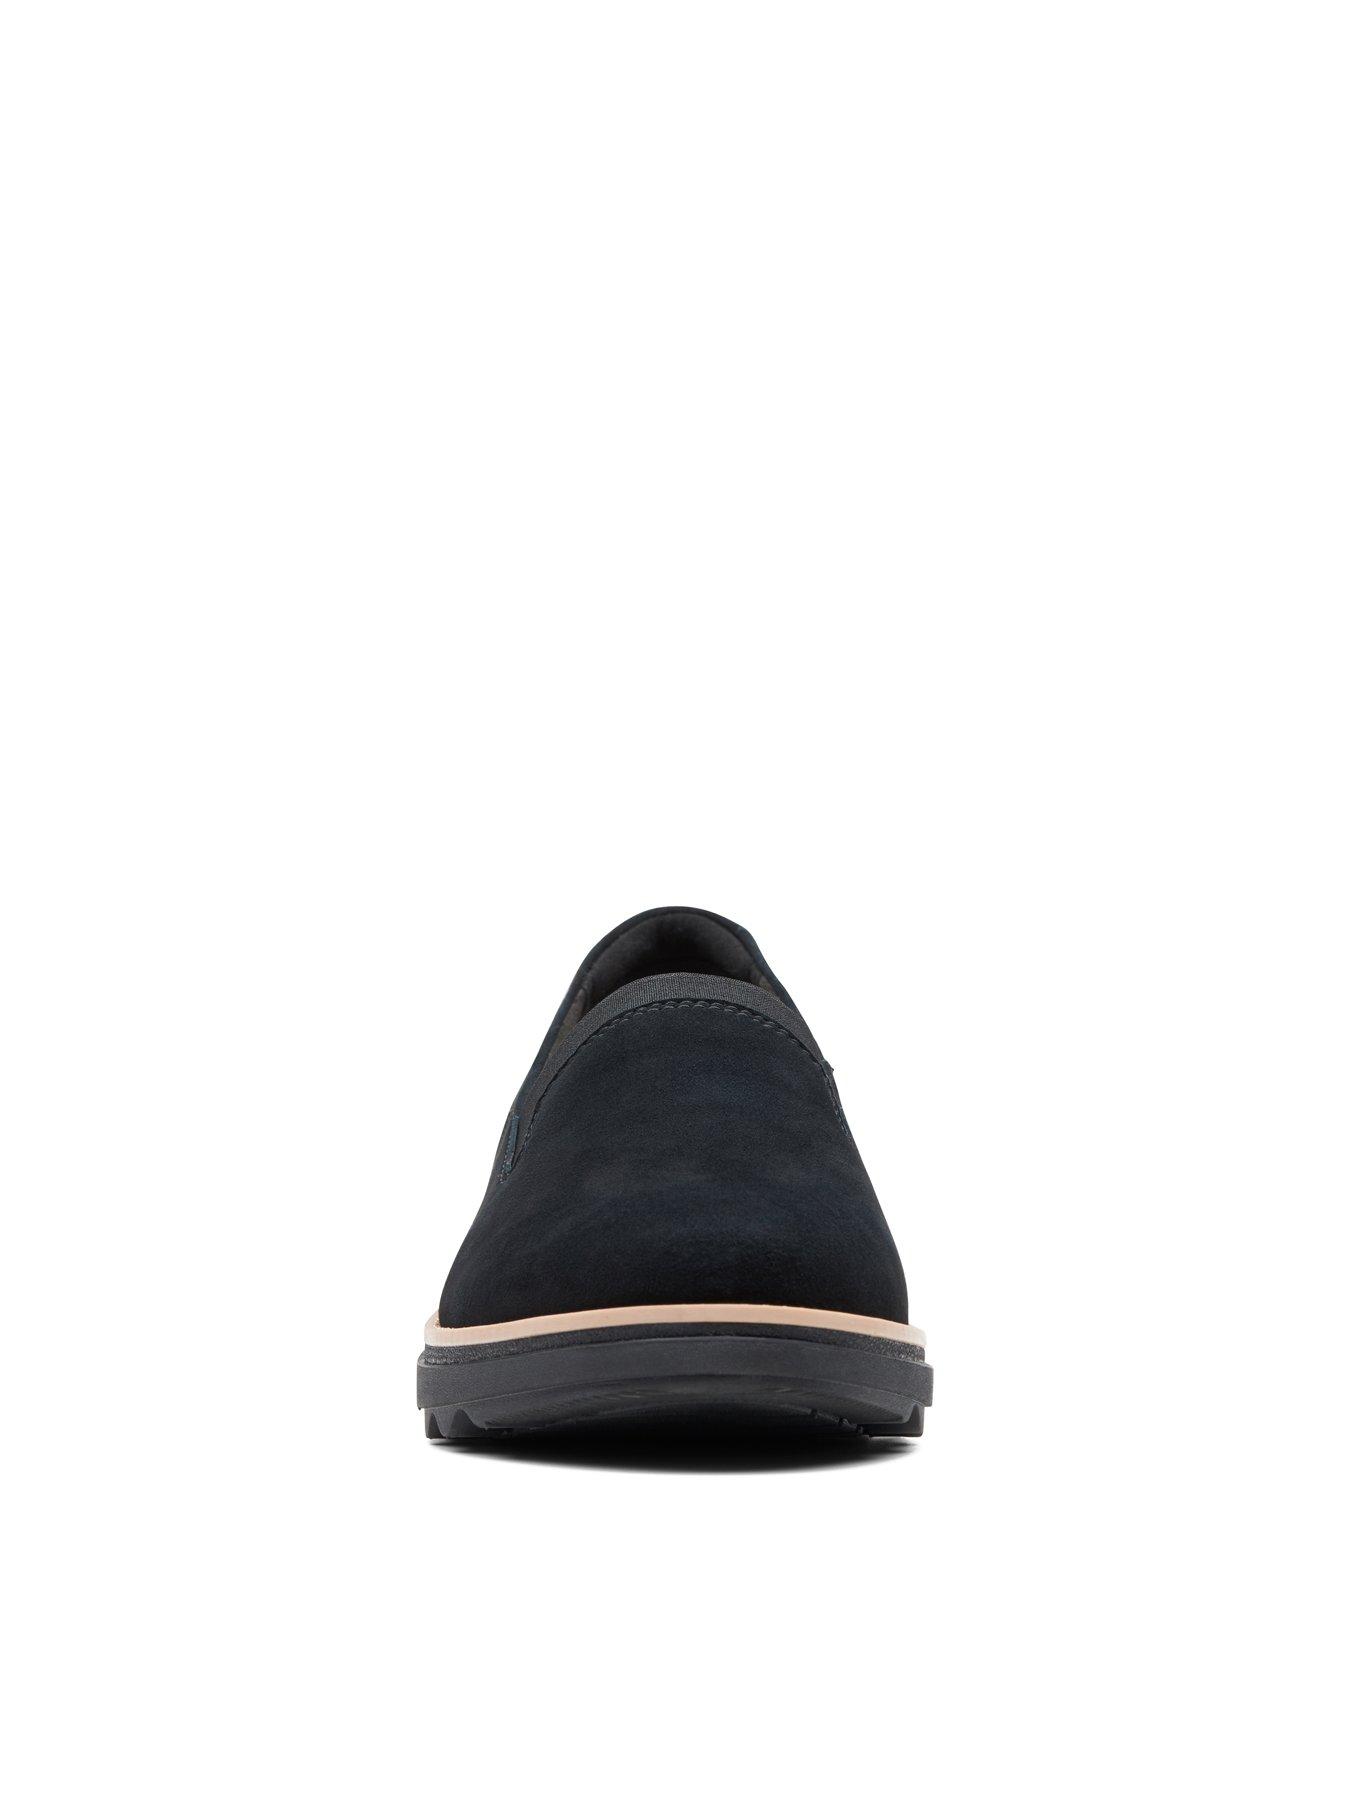 clarks sharon dolly black suede